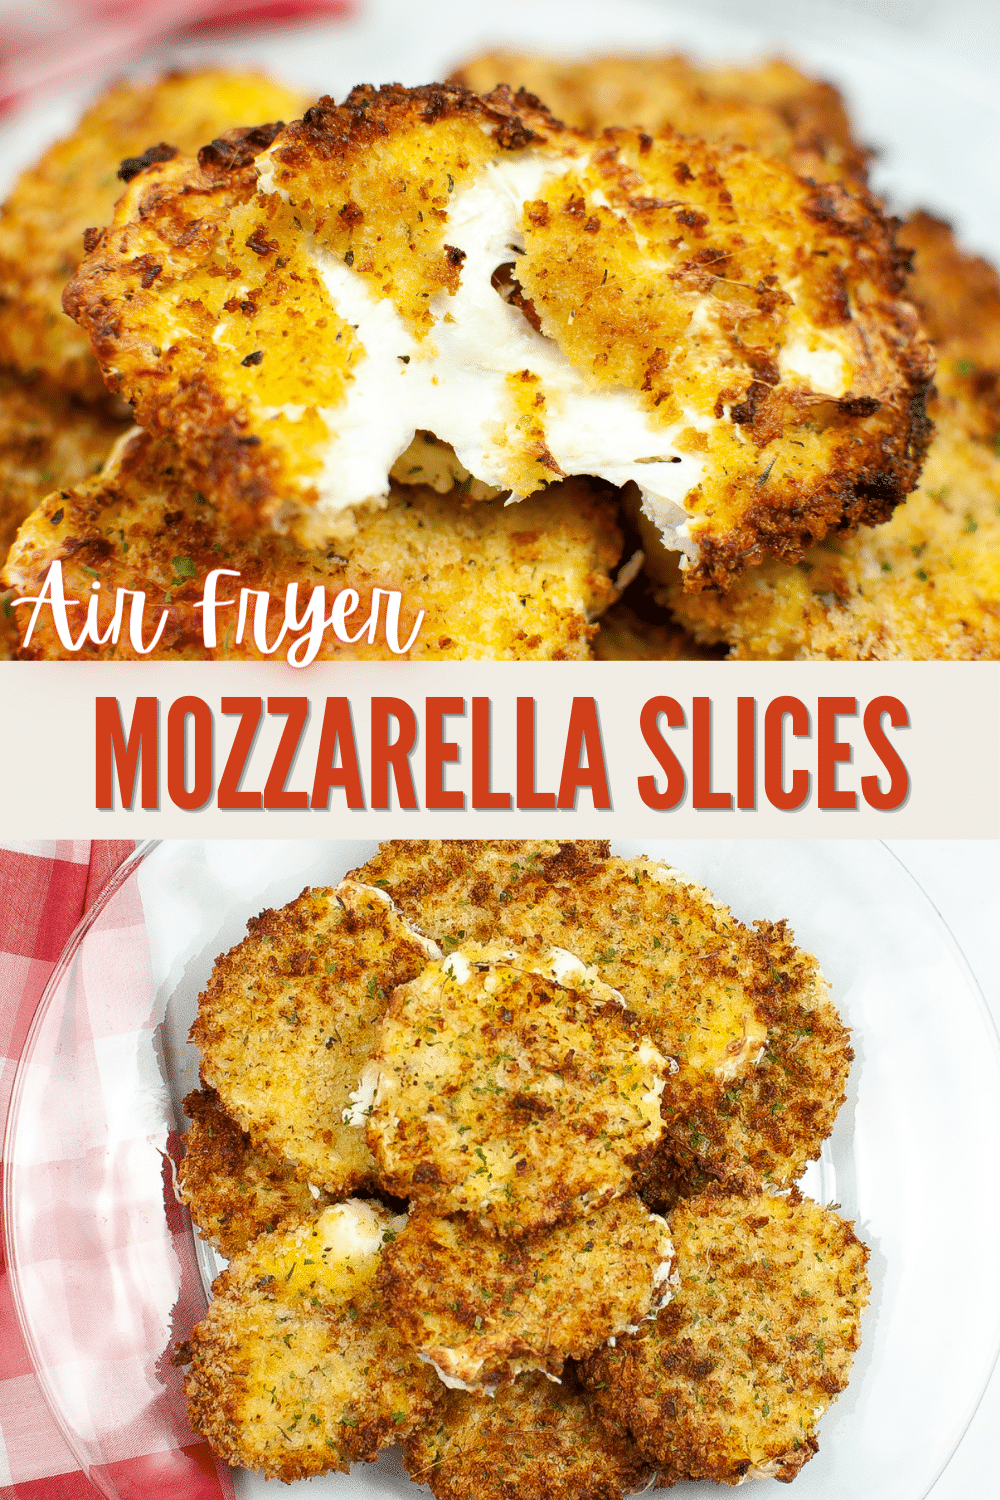 top image is a closeup of an air fryer mozzarella slice, bottom image is air fryer mozzarella slices on a glass plate next to a red and white checkered cloth with title text reading Air Fryer Mozzarella Slices